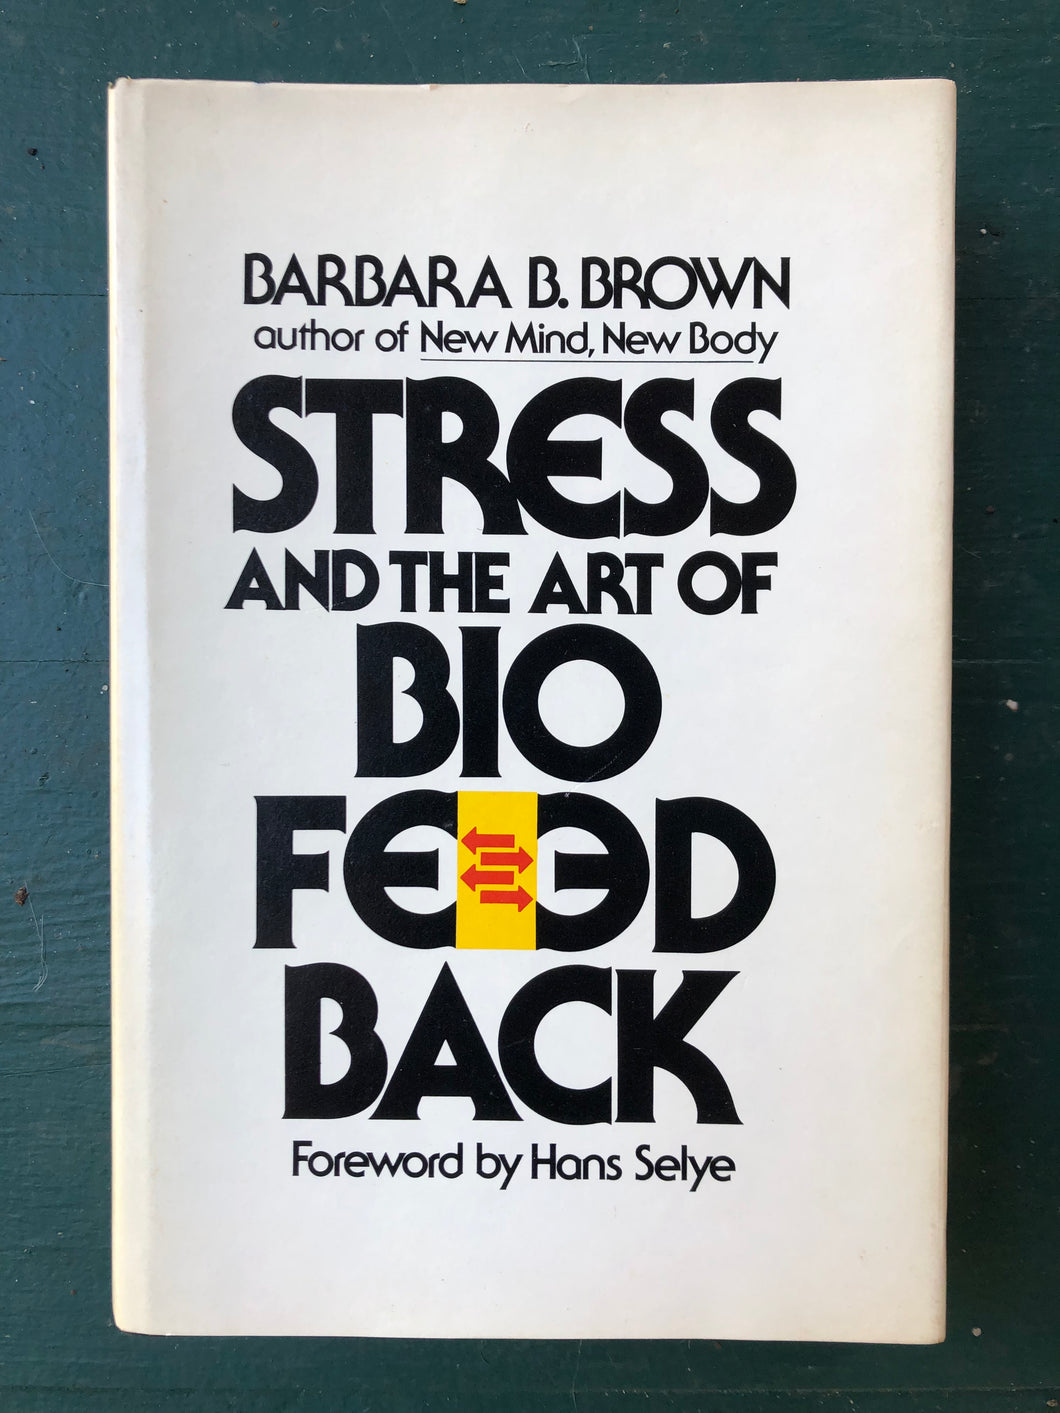 Stress and the Art of Biofeedback. by Barbara B. Brown.